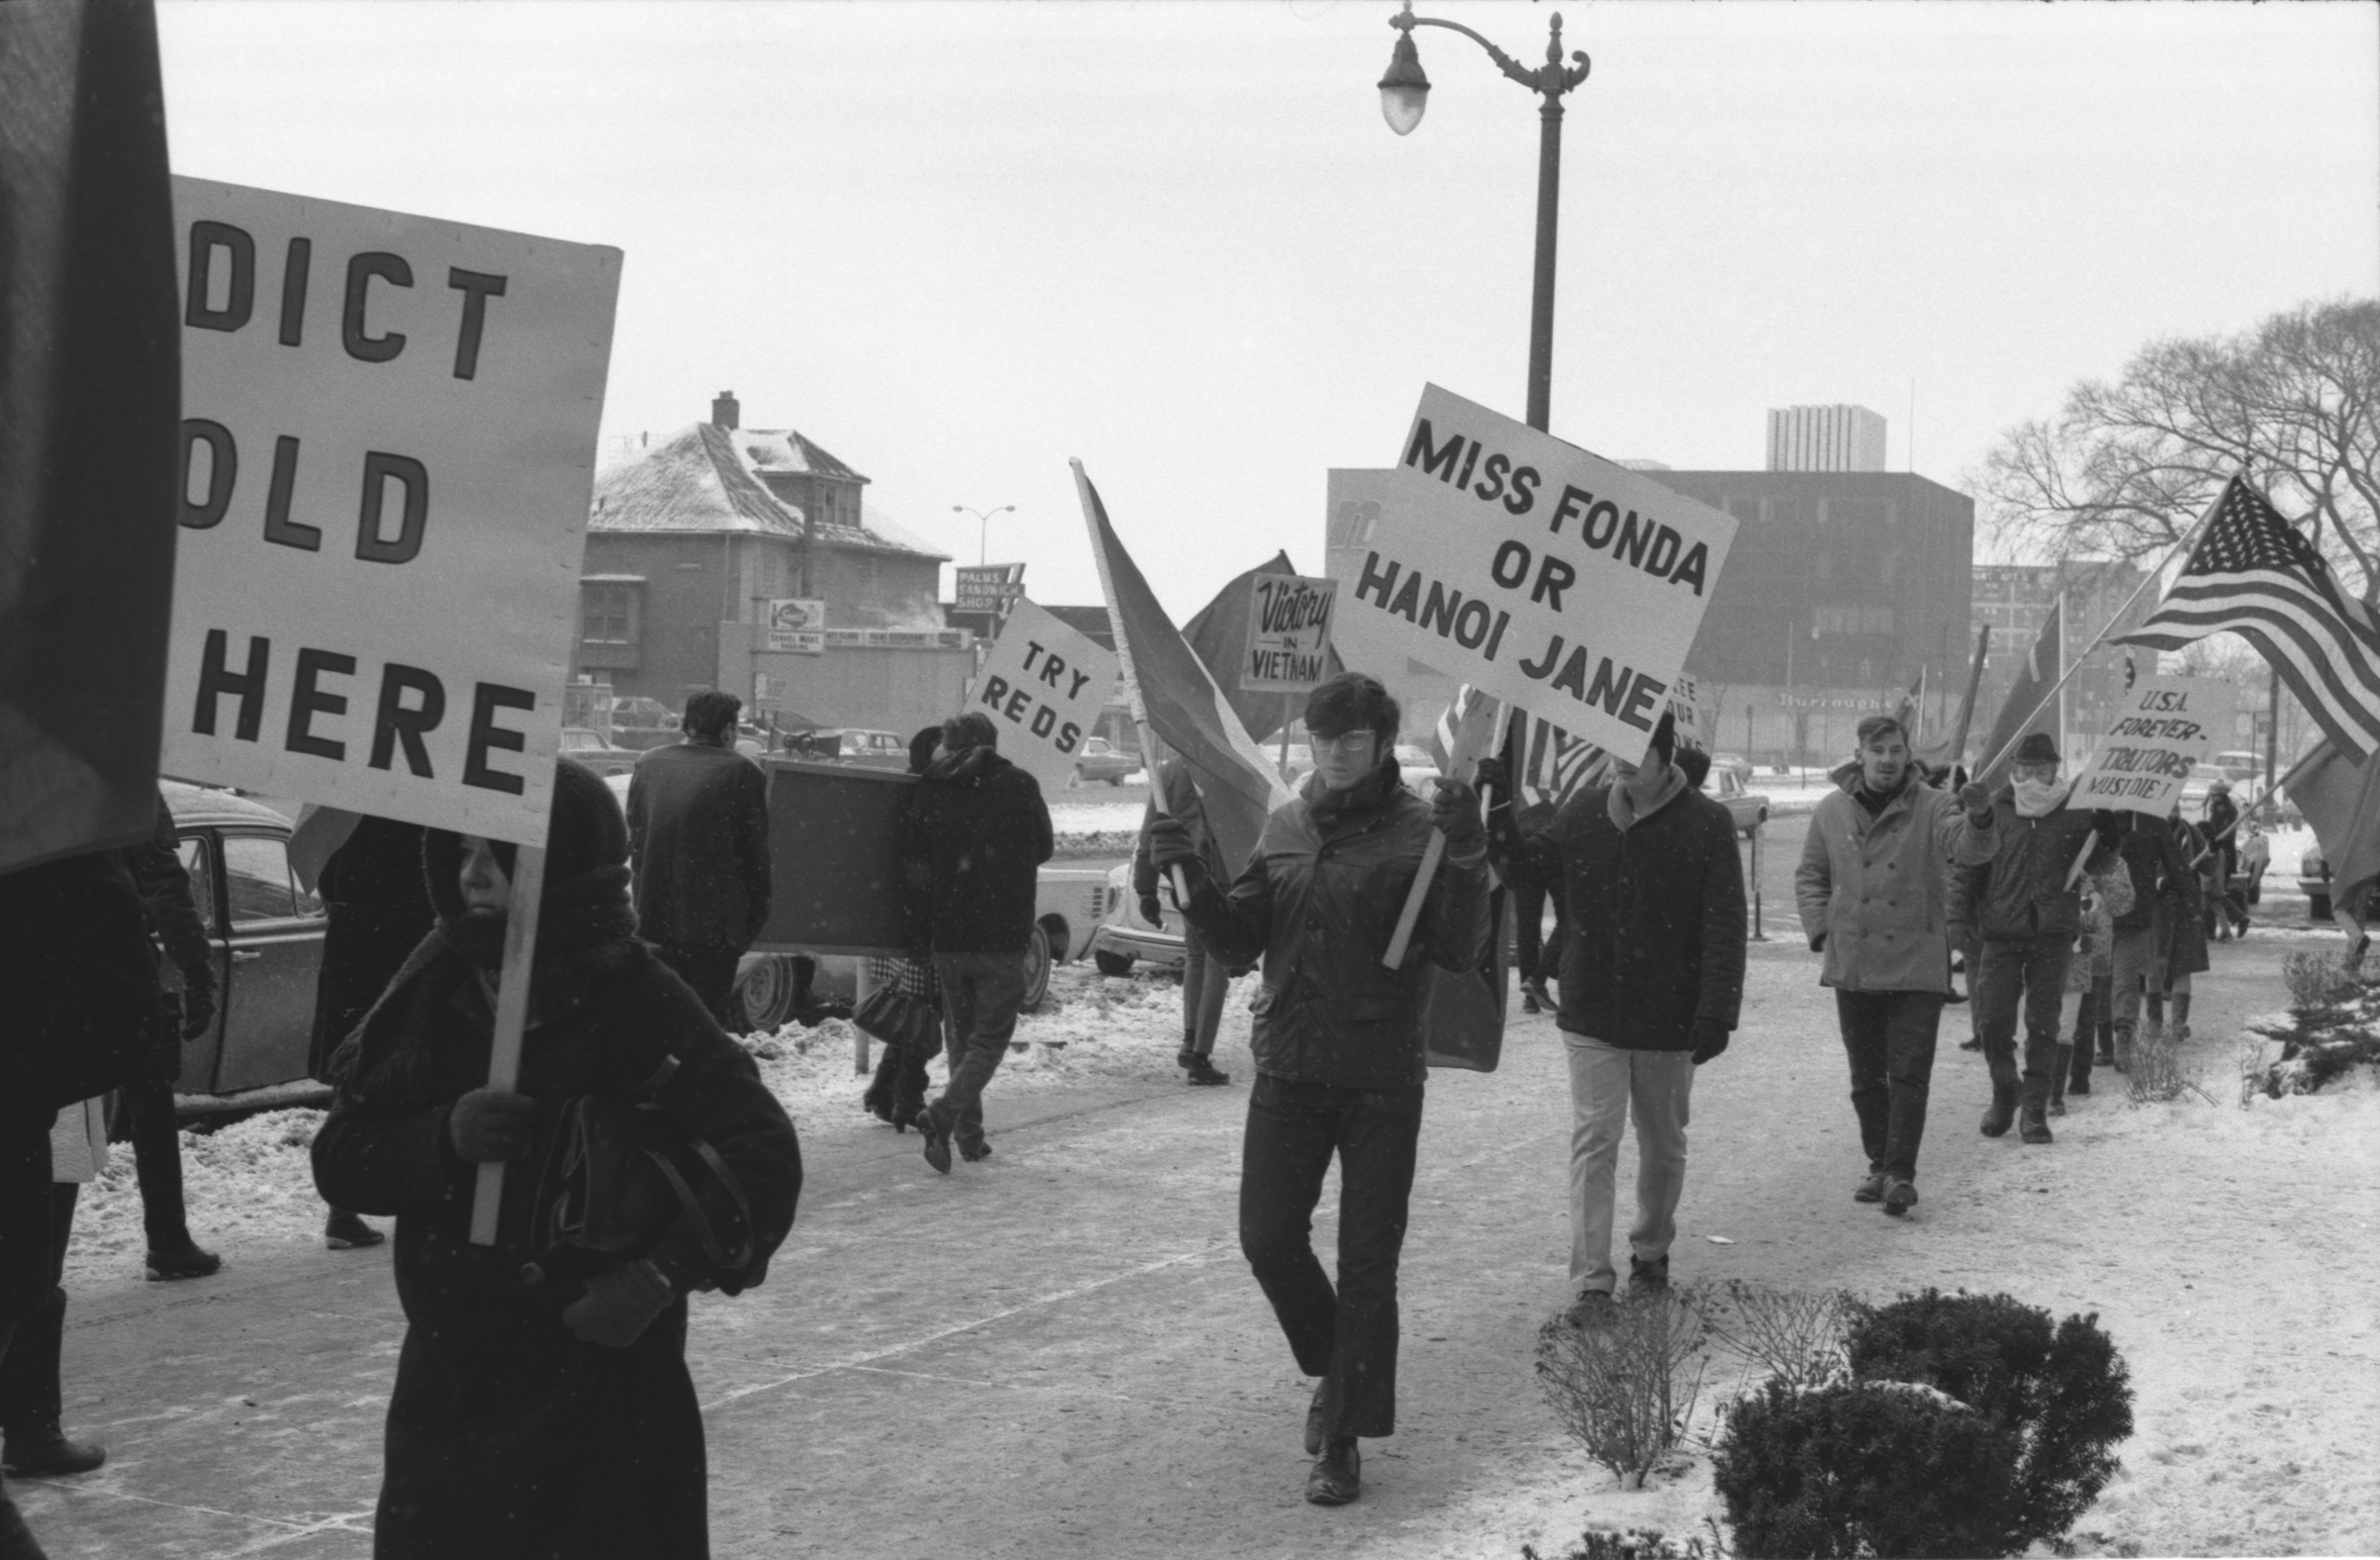 Protesters carrying signs protesting Jane Fonda's visit to Hanoi outside Howard Johnson's Hotel in Detroit during the time of the "Winter Soldier Investigation," Detroit, 1971. (Bill Ray—Getty Images)